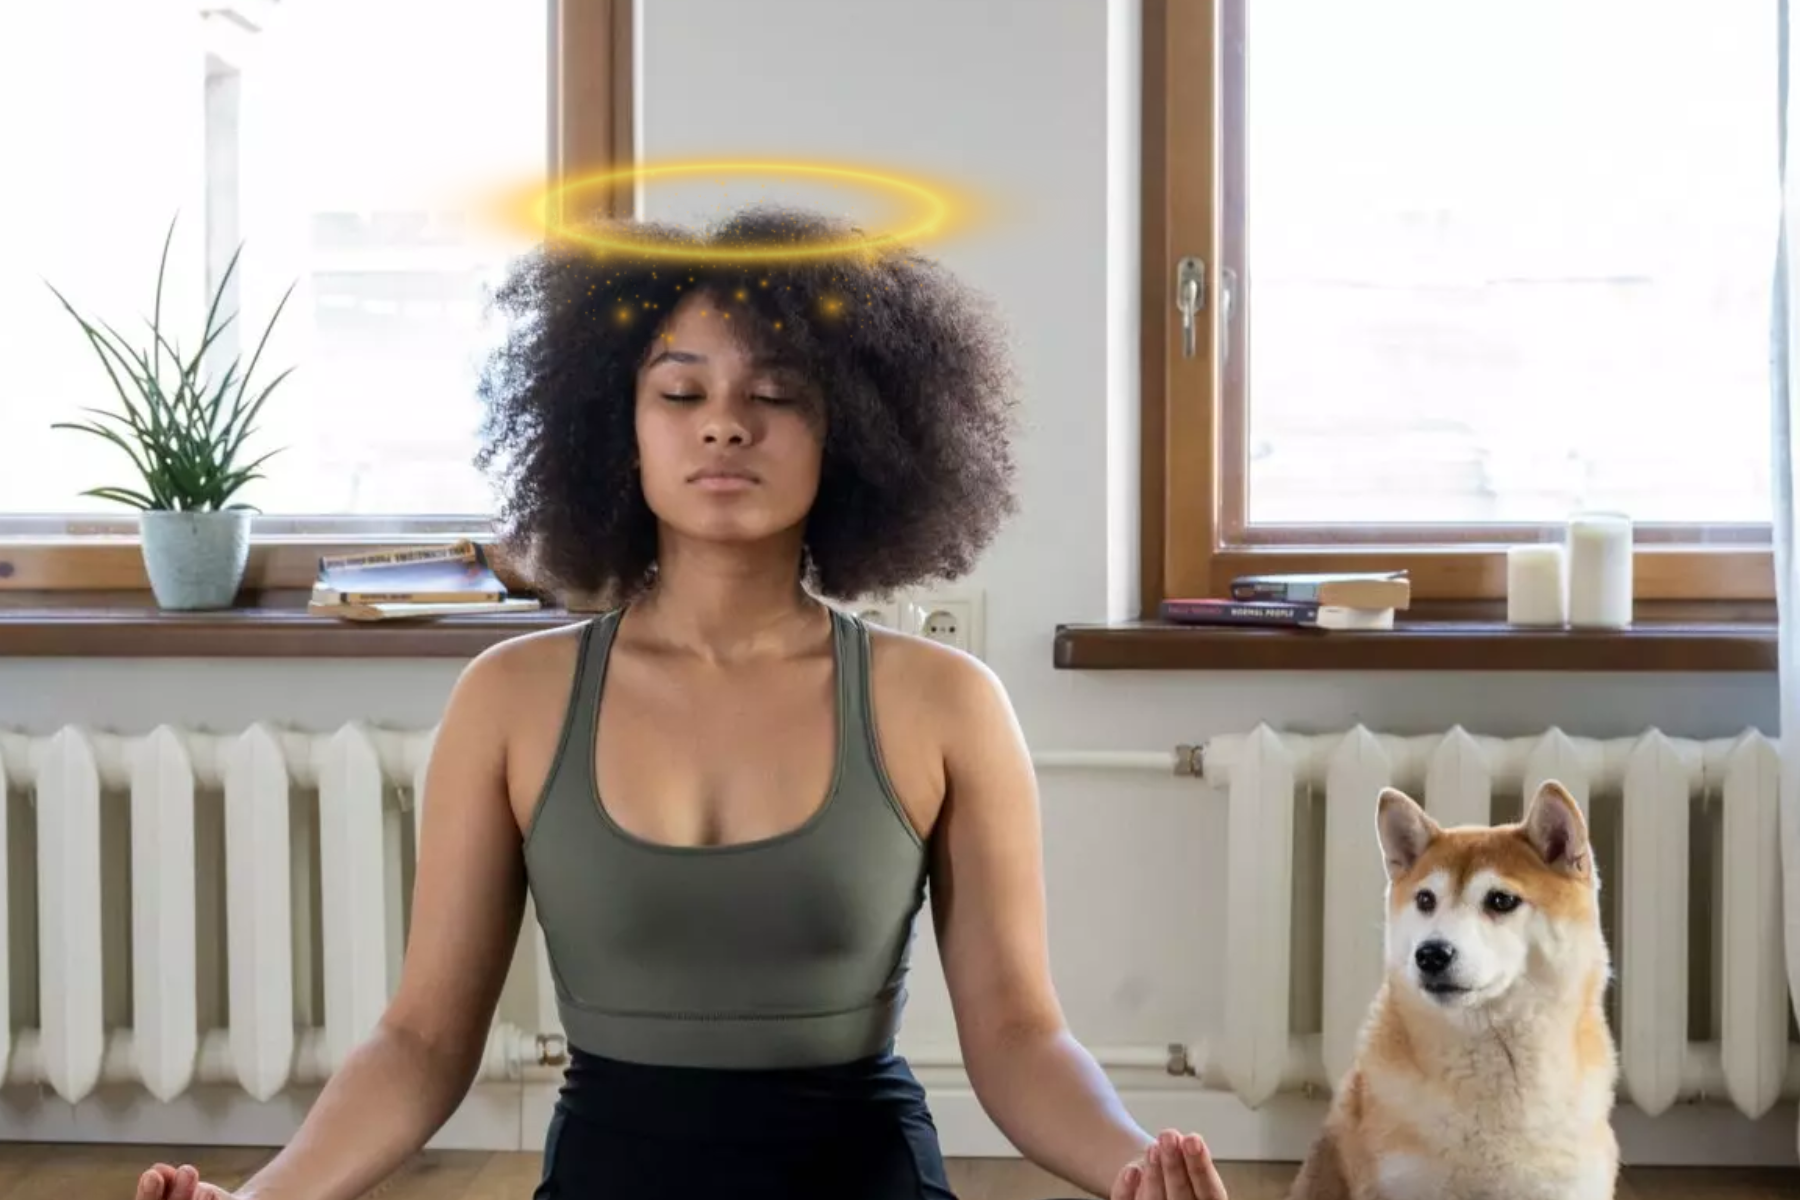 A halo-ed woman meditates on the floor with her dog